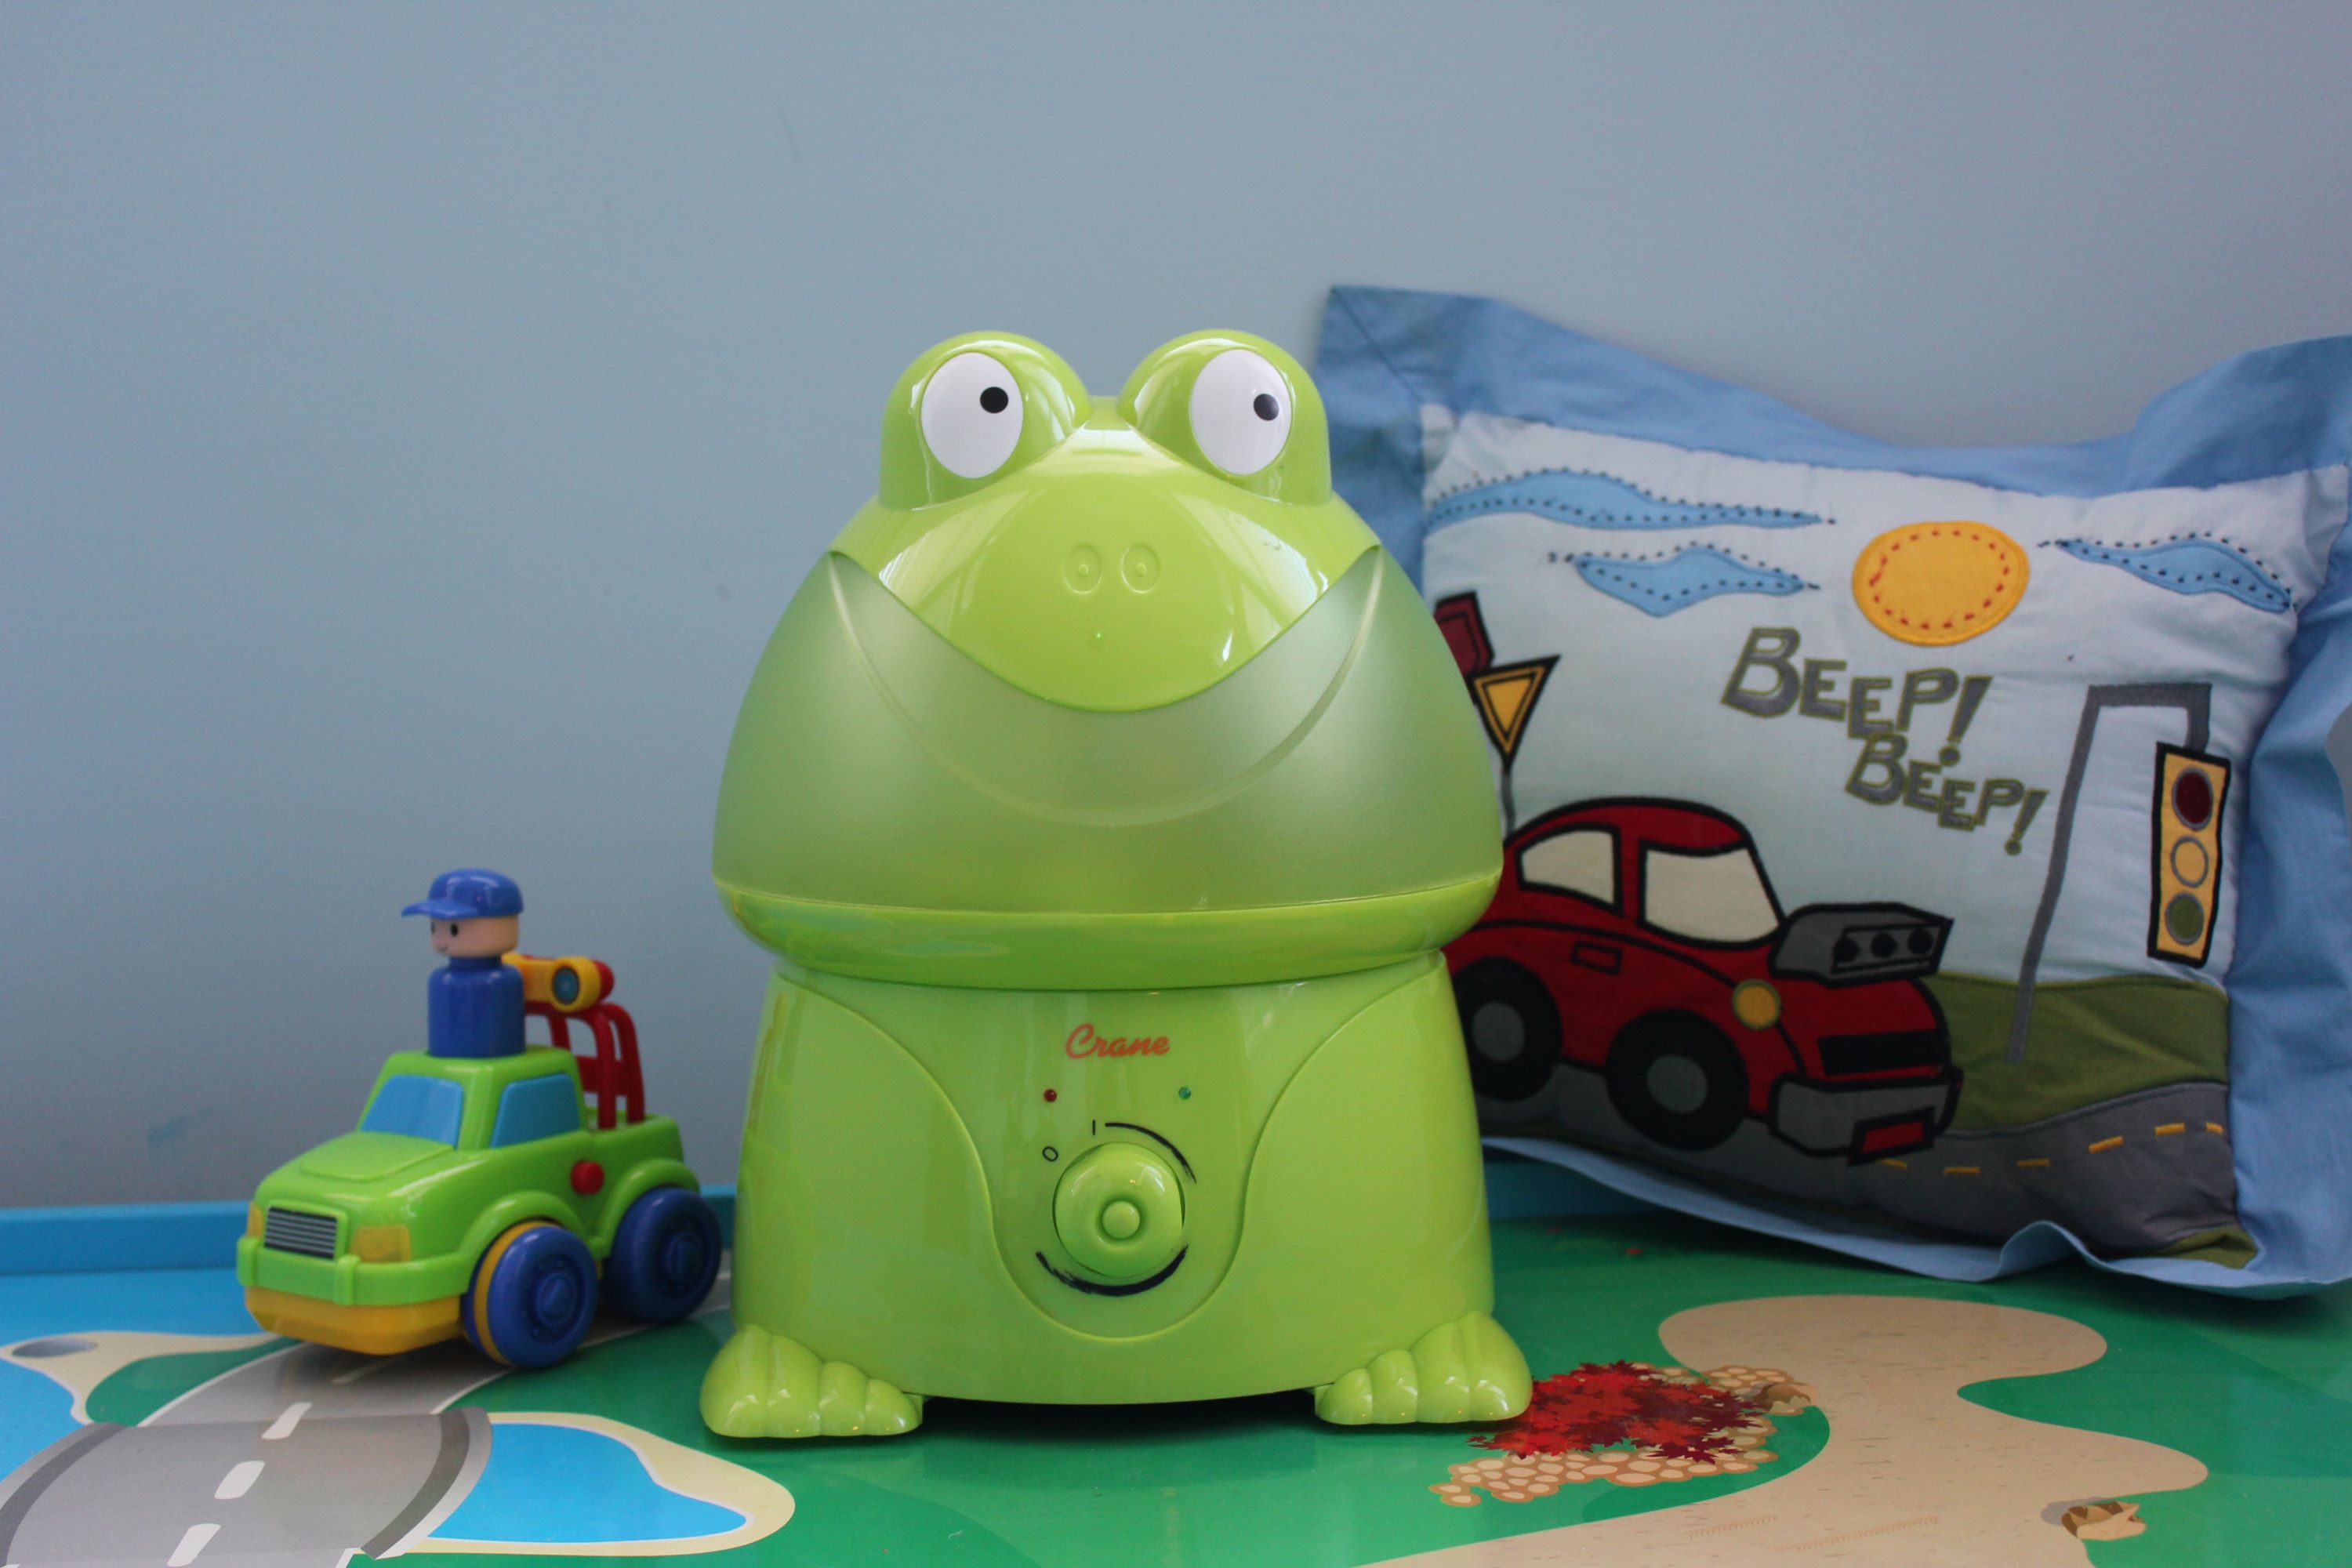 Crane USA Adorable Ultrasonic Cool Mist Humidifier, 1 Gallon, 500 Sq Ft Coverage, 24 Hour Run Time - Frog - image 5 of 7